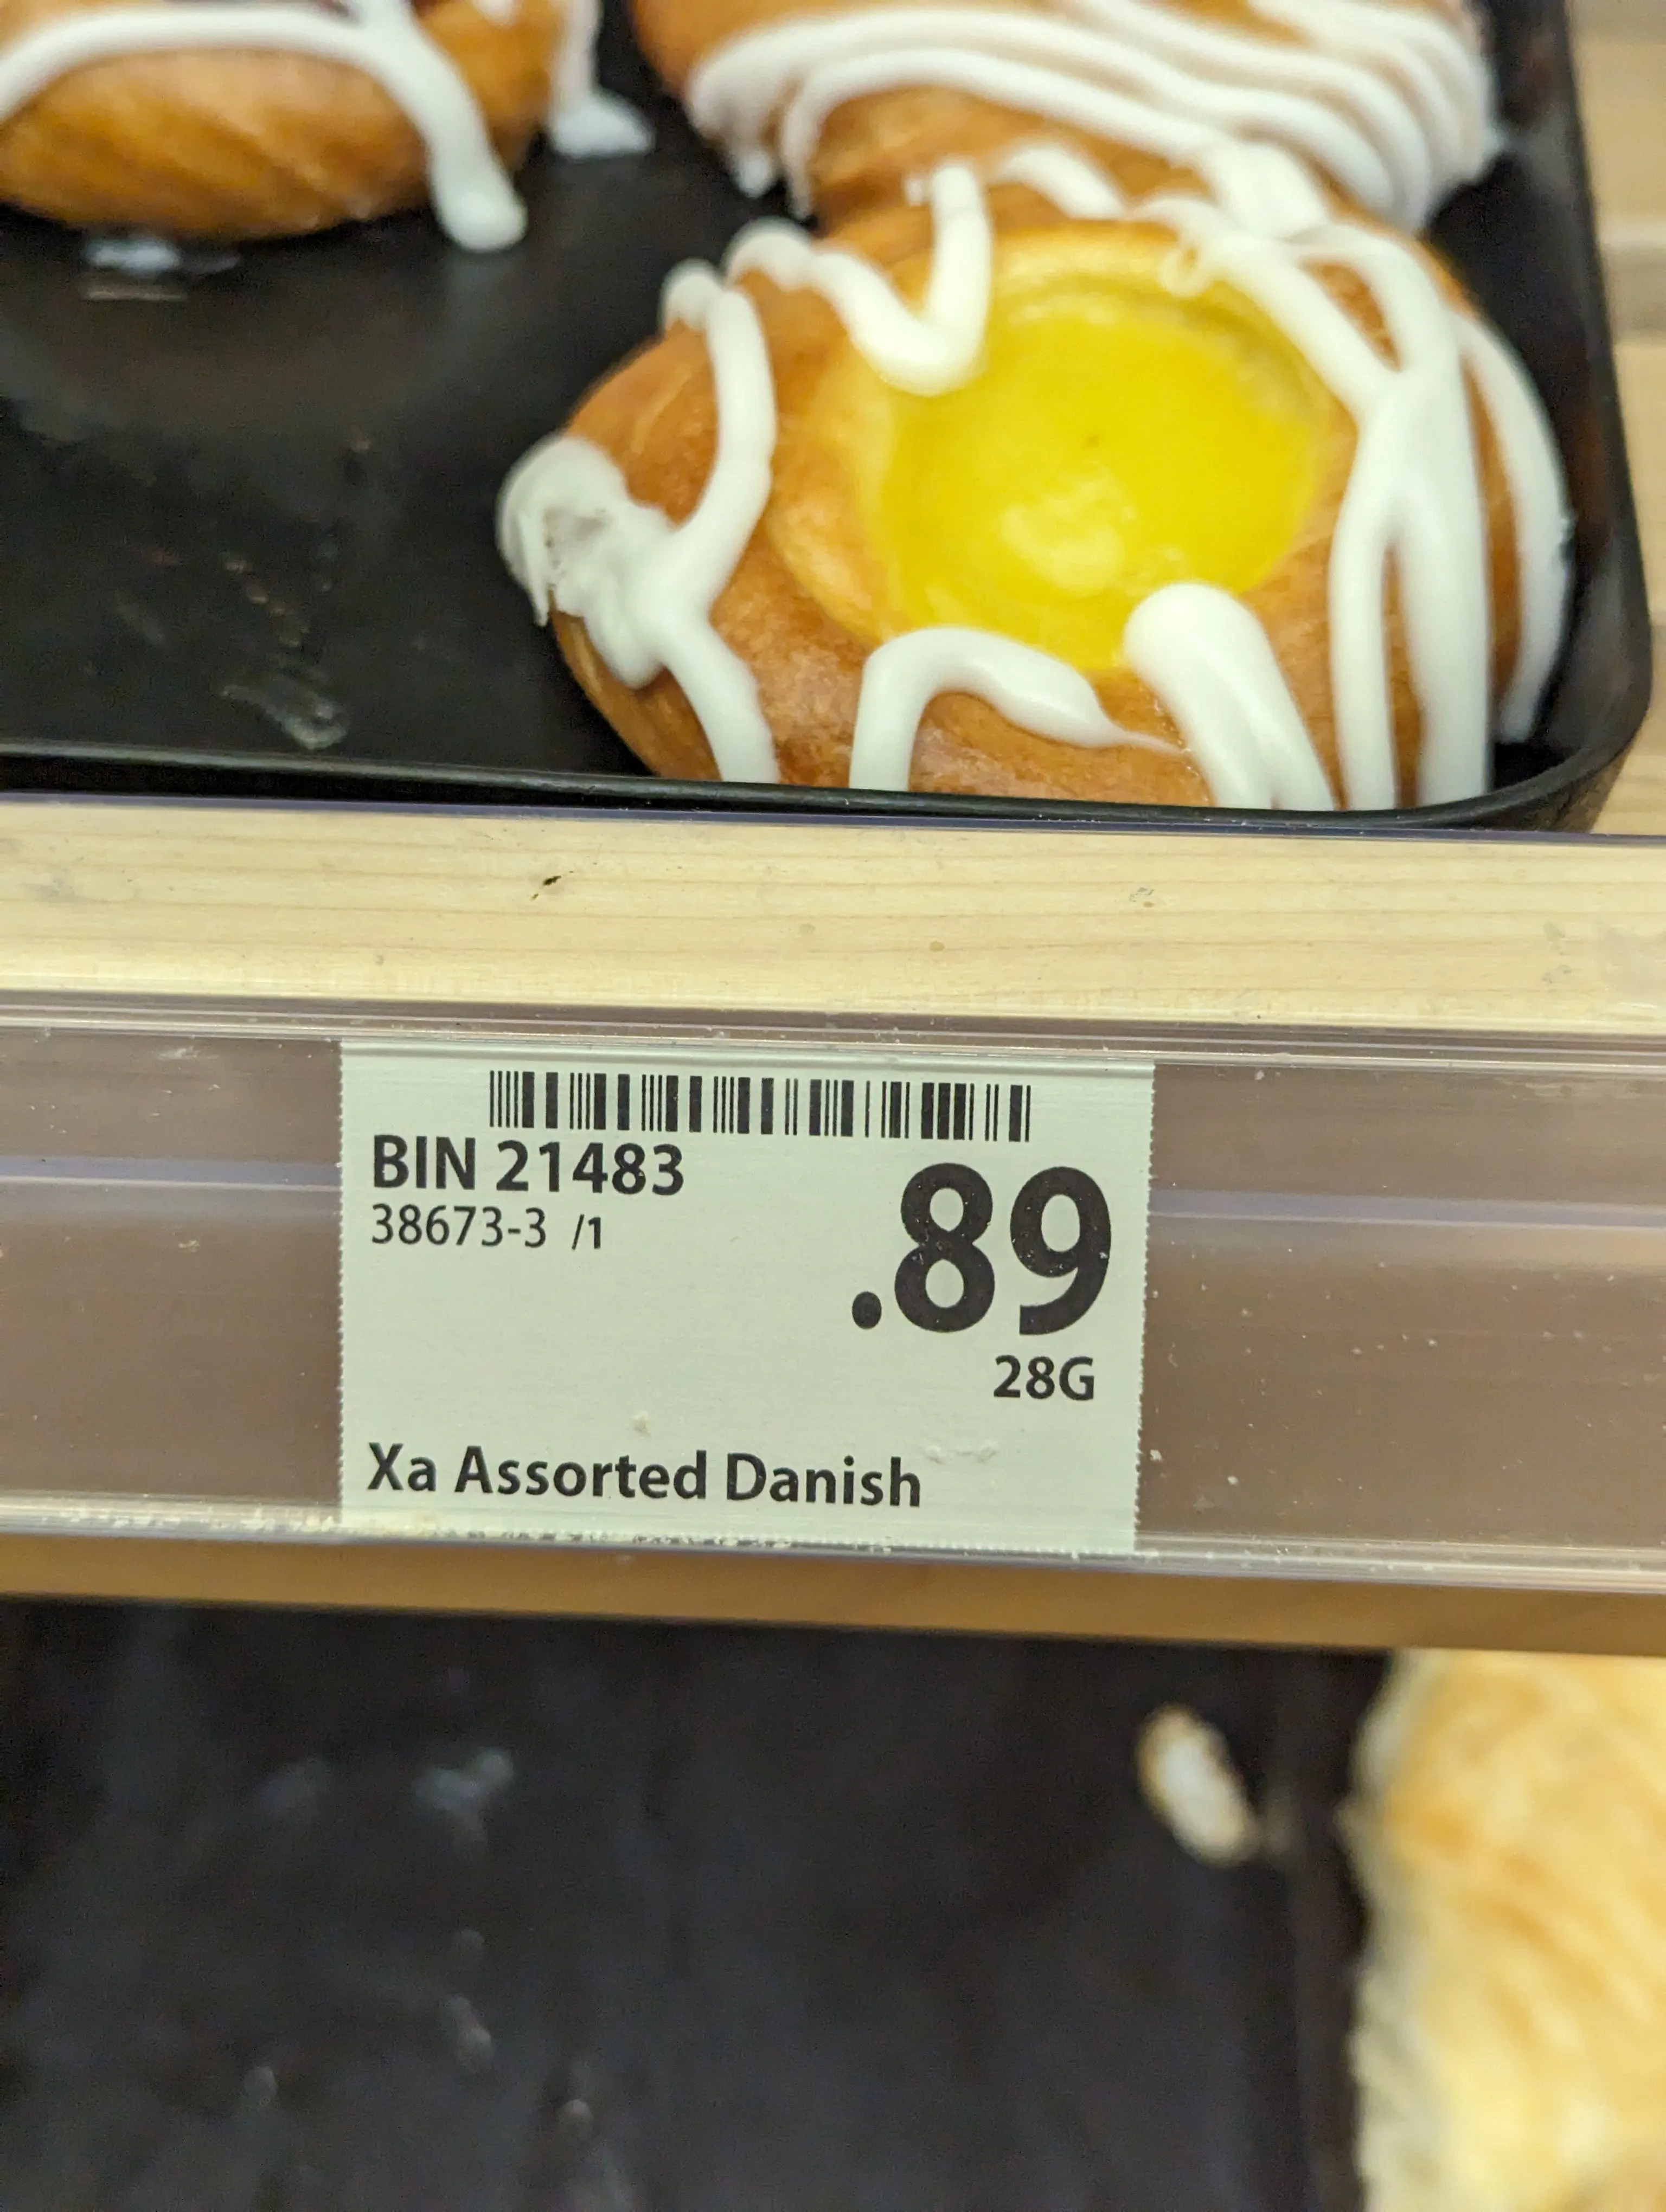 A danish in a bakery tray. you can clearly see the tag as well as some donuts below. The photo is blurry and not really in focus.